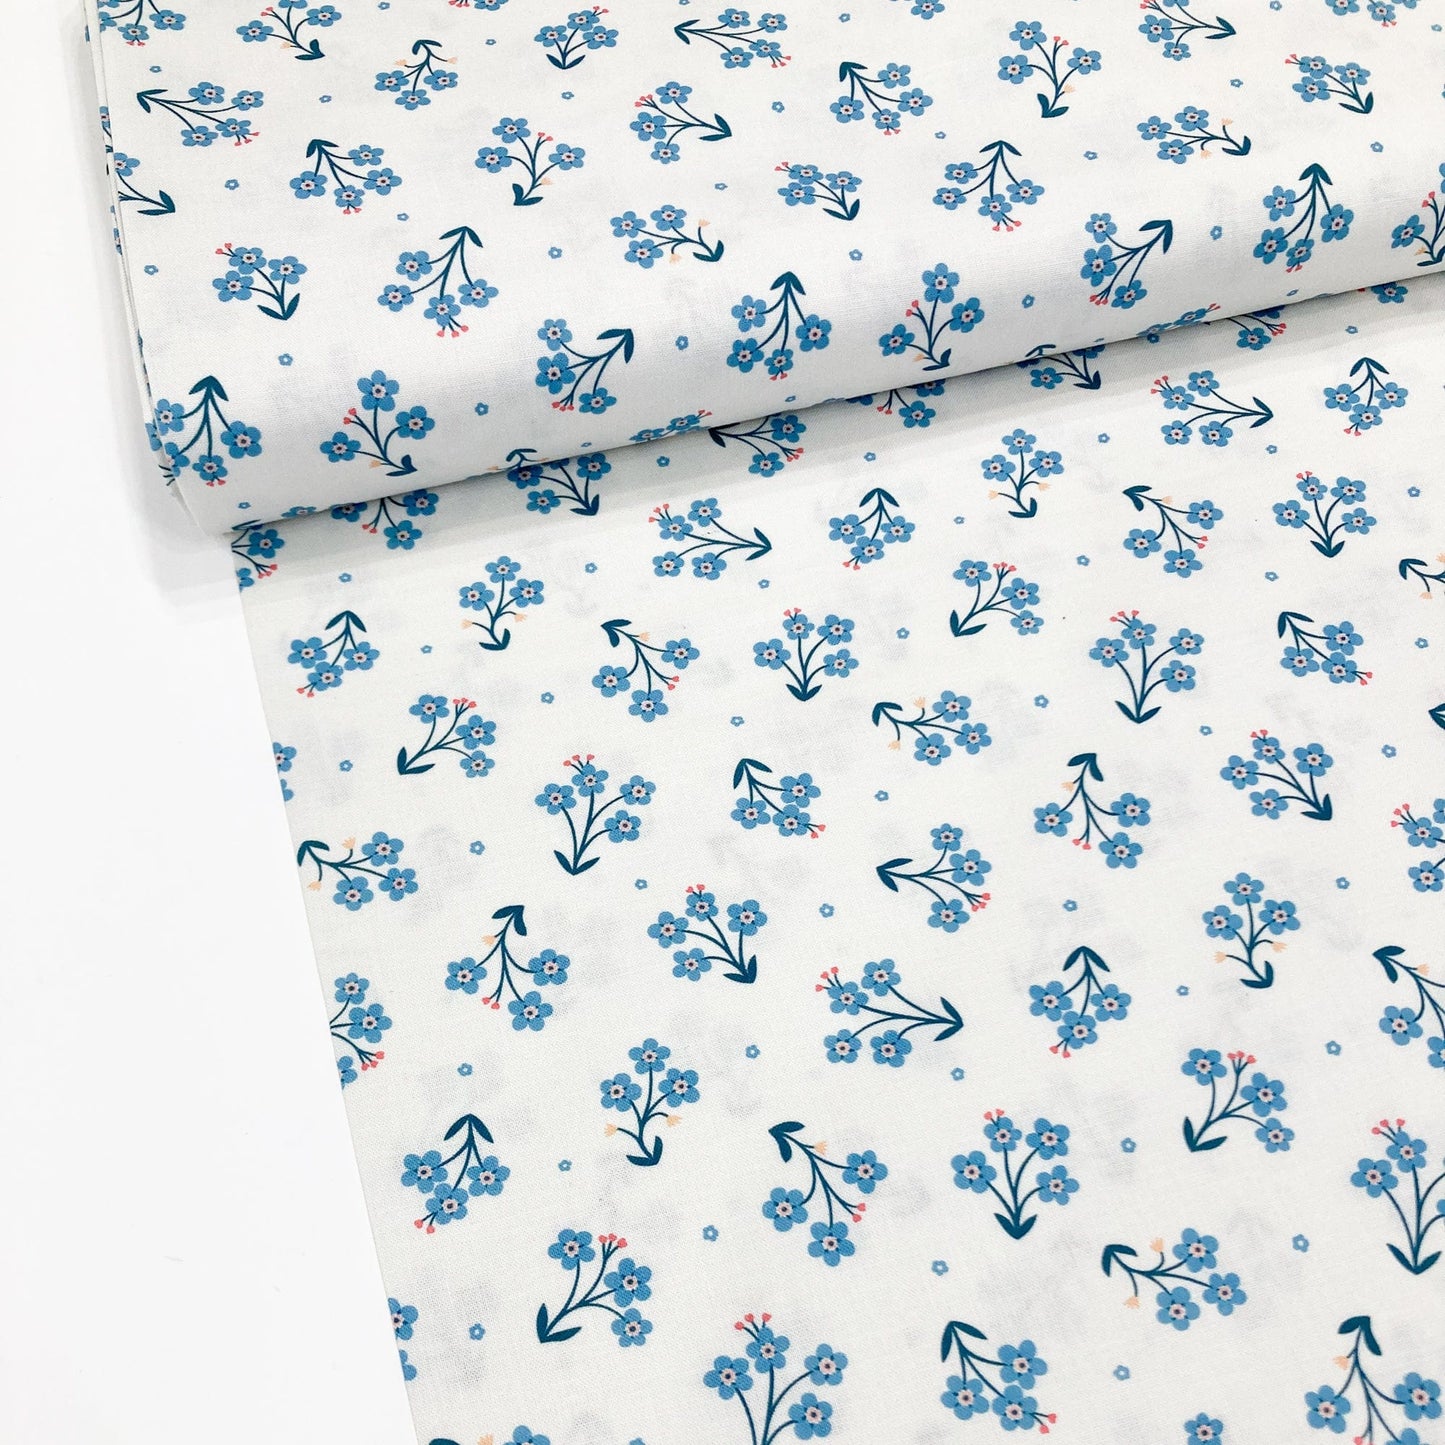 Cloud 9 Organic Quilting Cotton 'Forget Me Not'